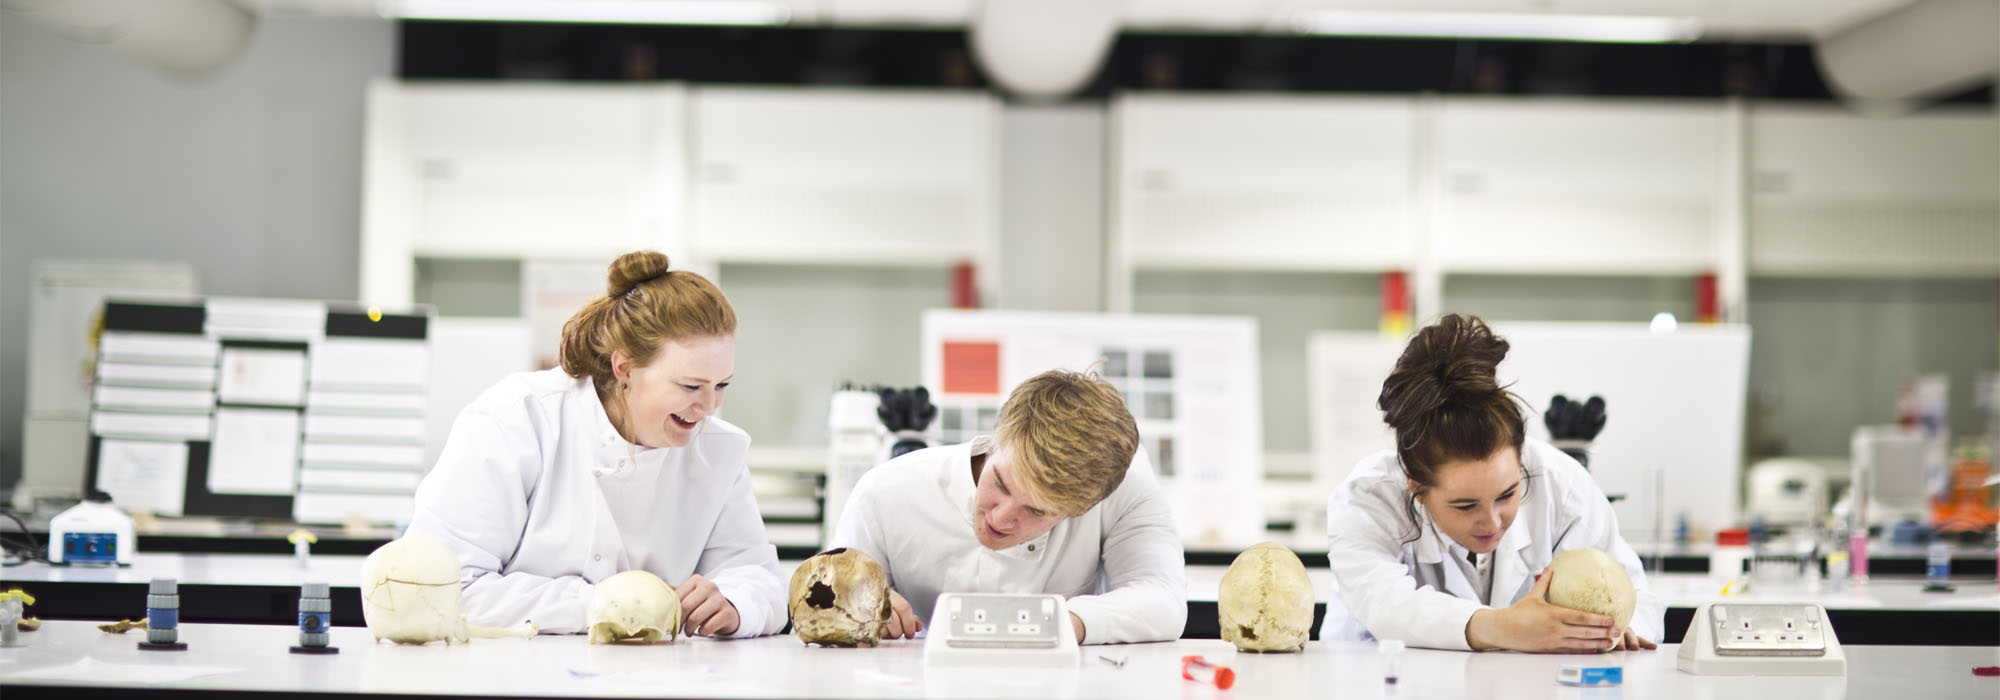 Three students wearing white lab coats sitting in a science lab investigating mock skulls